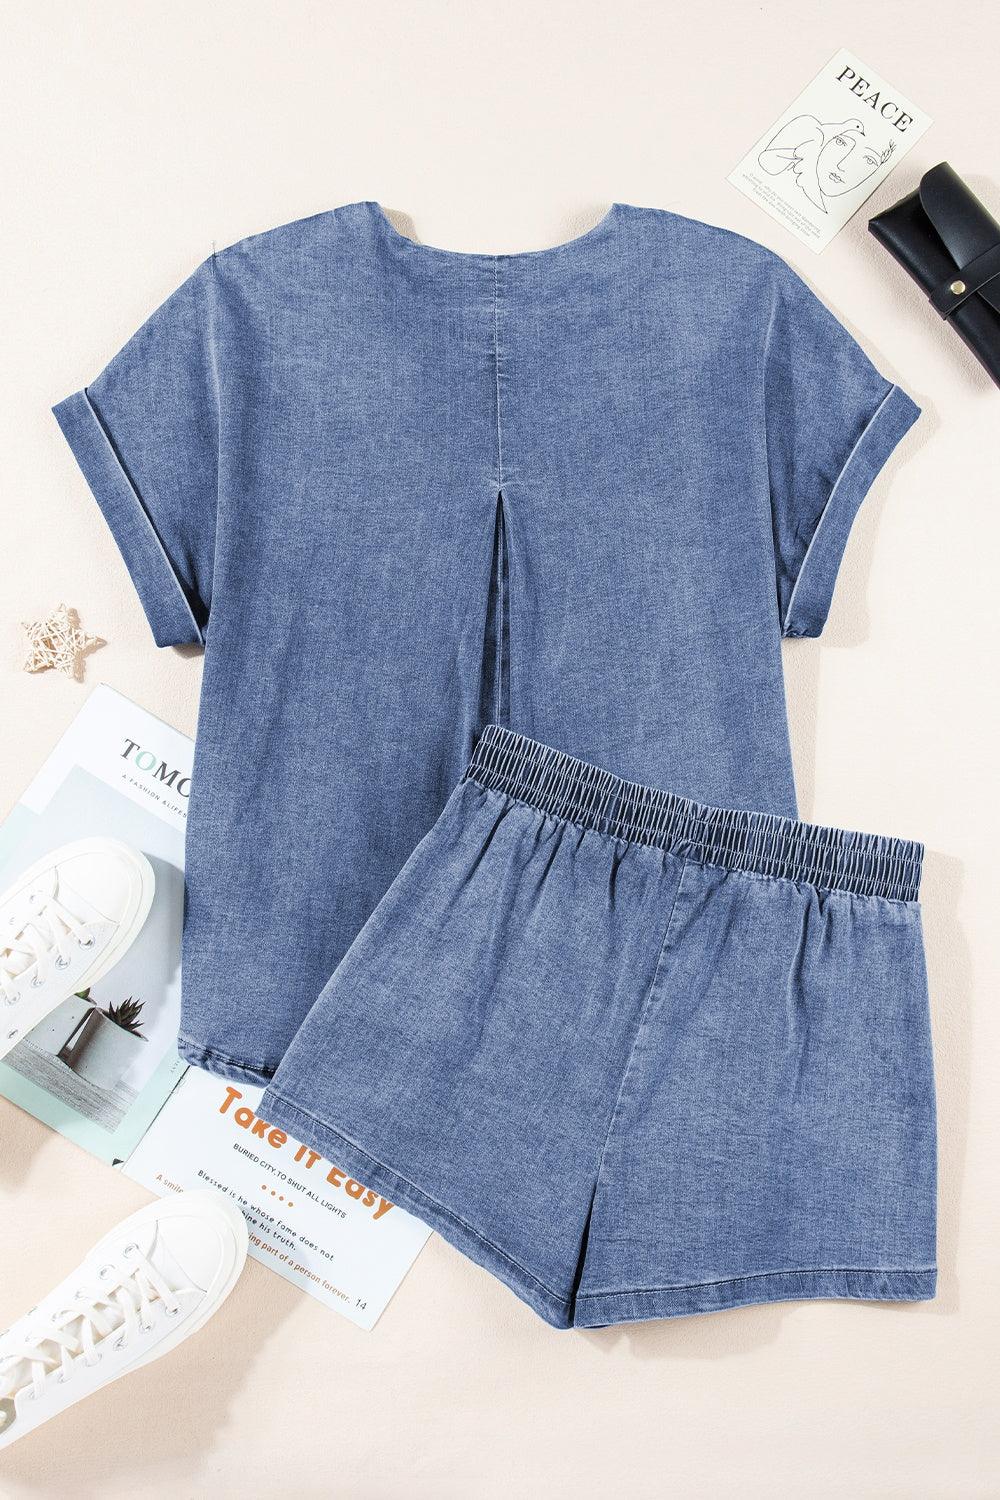 Women's Outfits & Sets Round Neck Short Sleeve Top and Shorts Denim Set